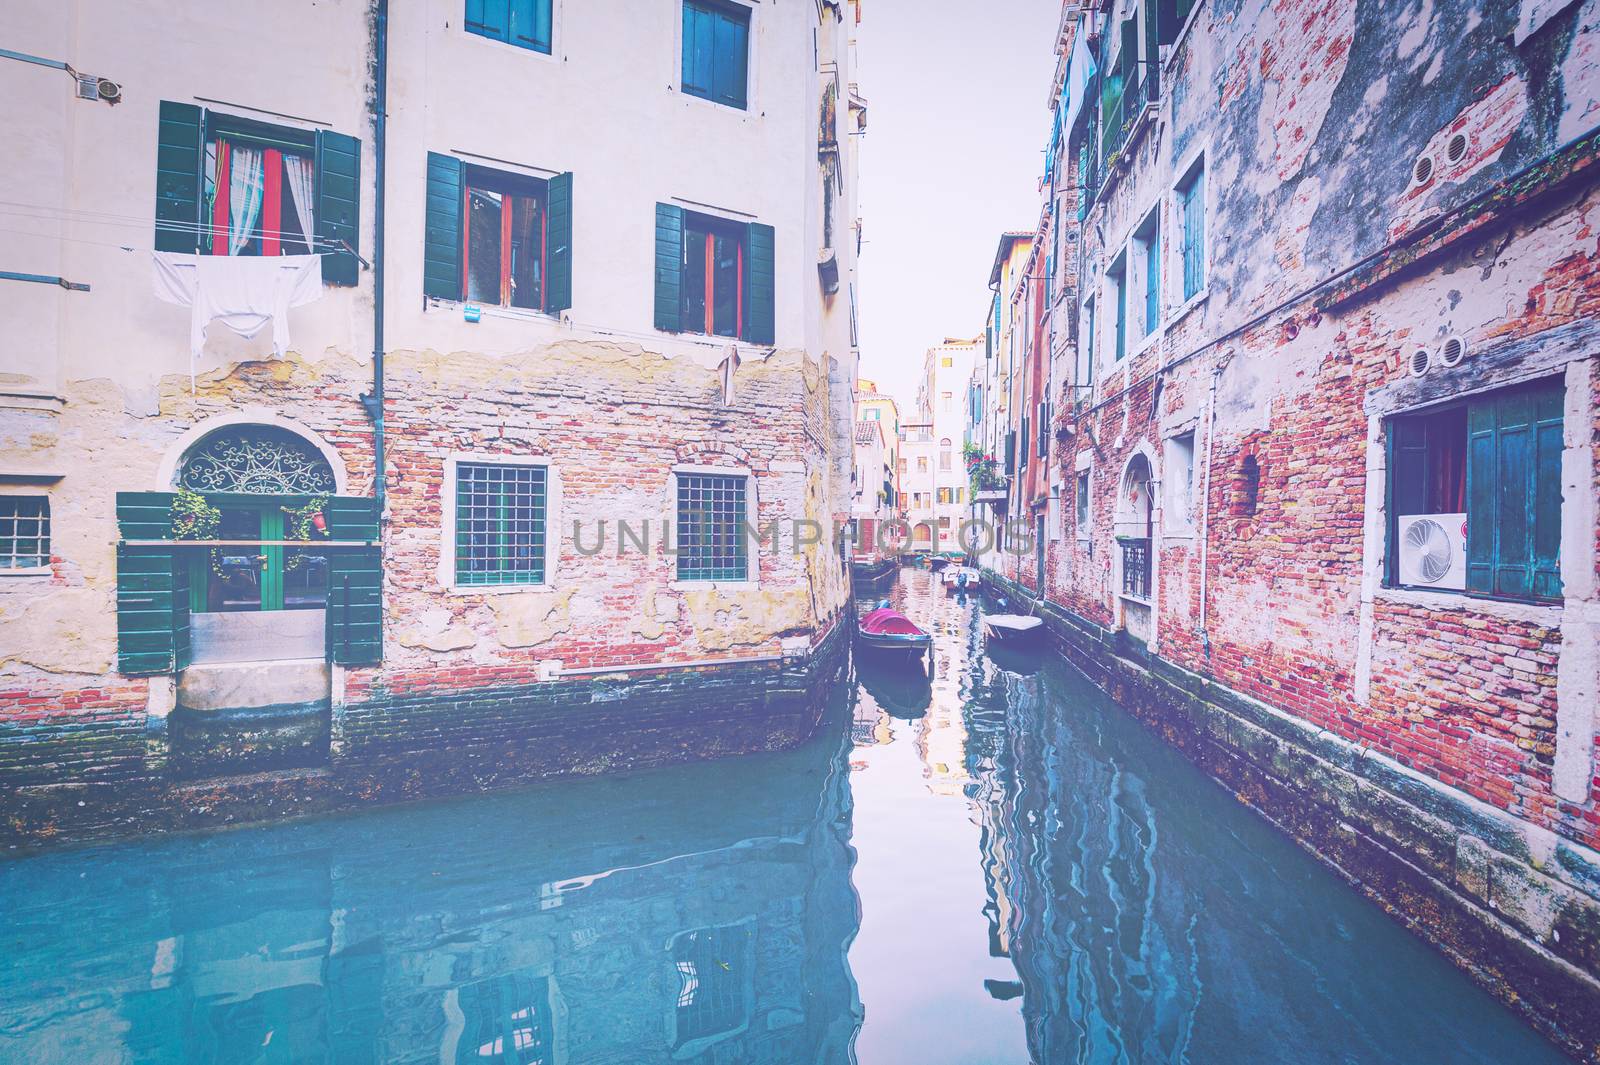 Deserted Venice in faded color effect.  Museum City is situated across a group of islands that are separated by canals and linked by empty bridges.  